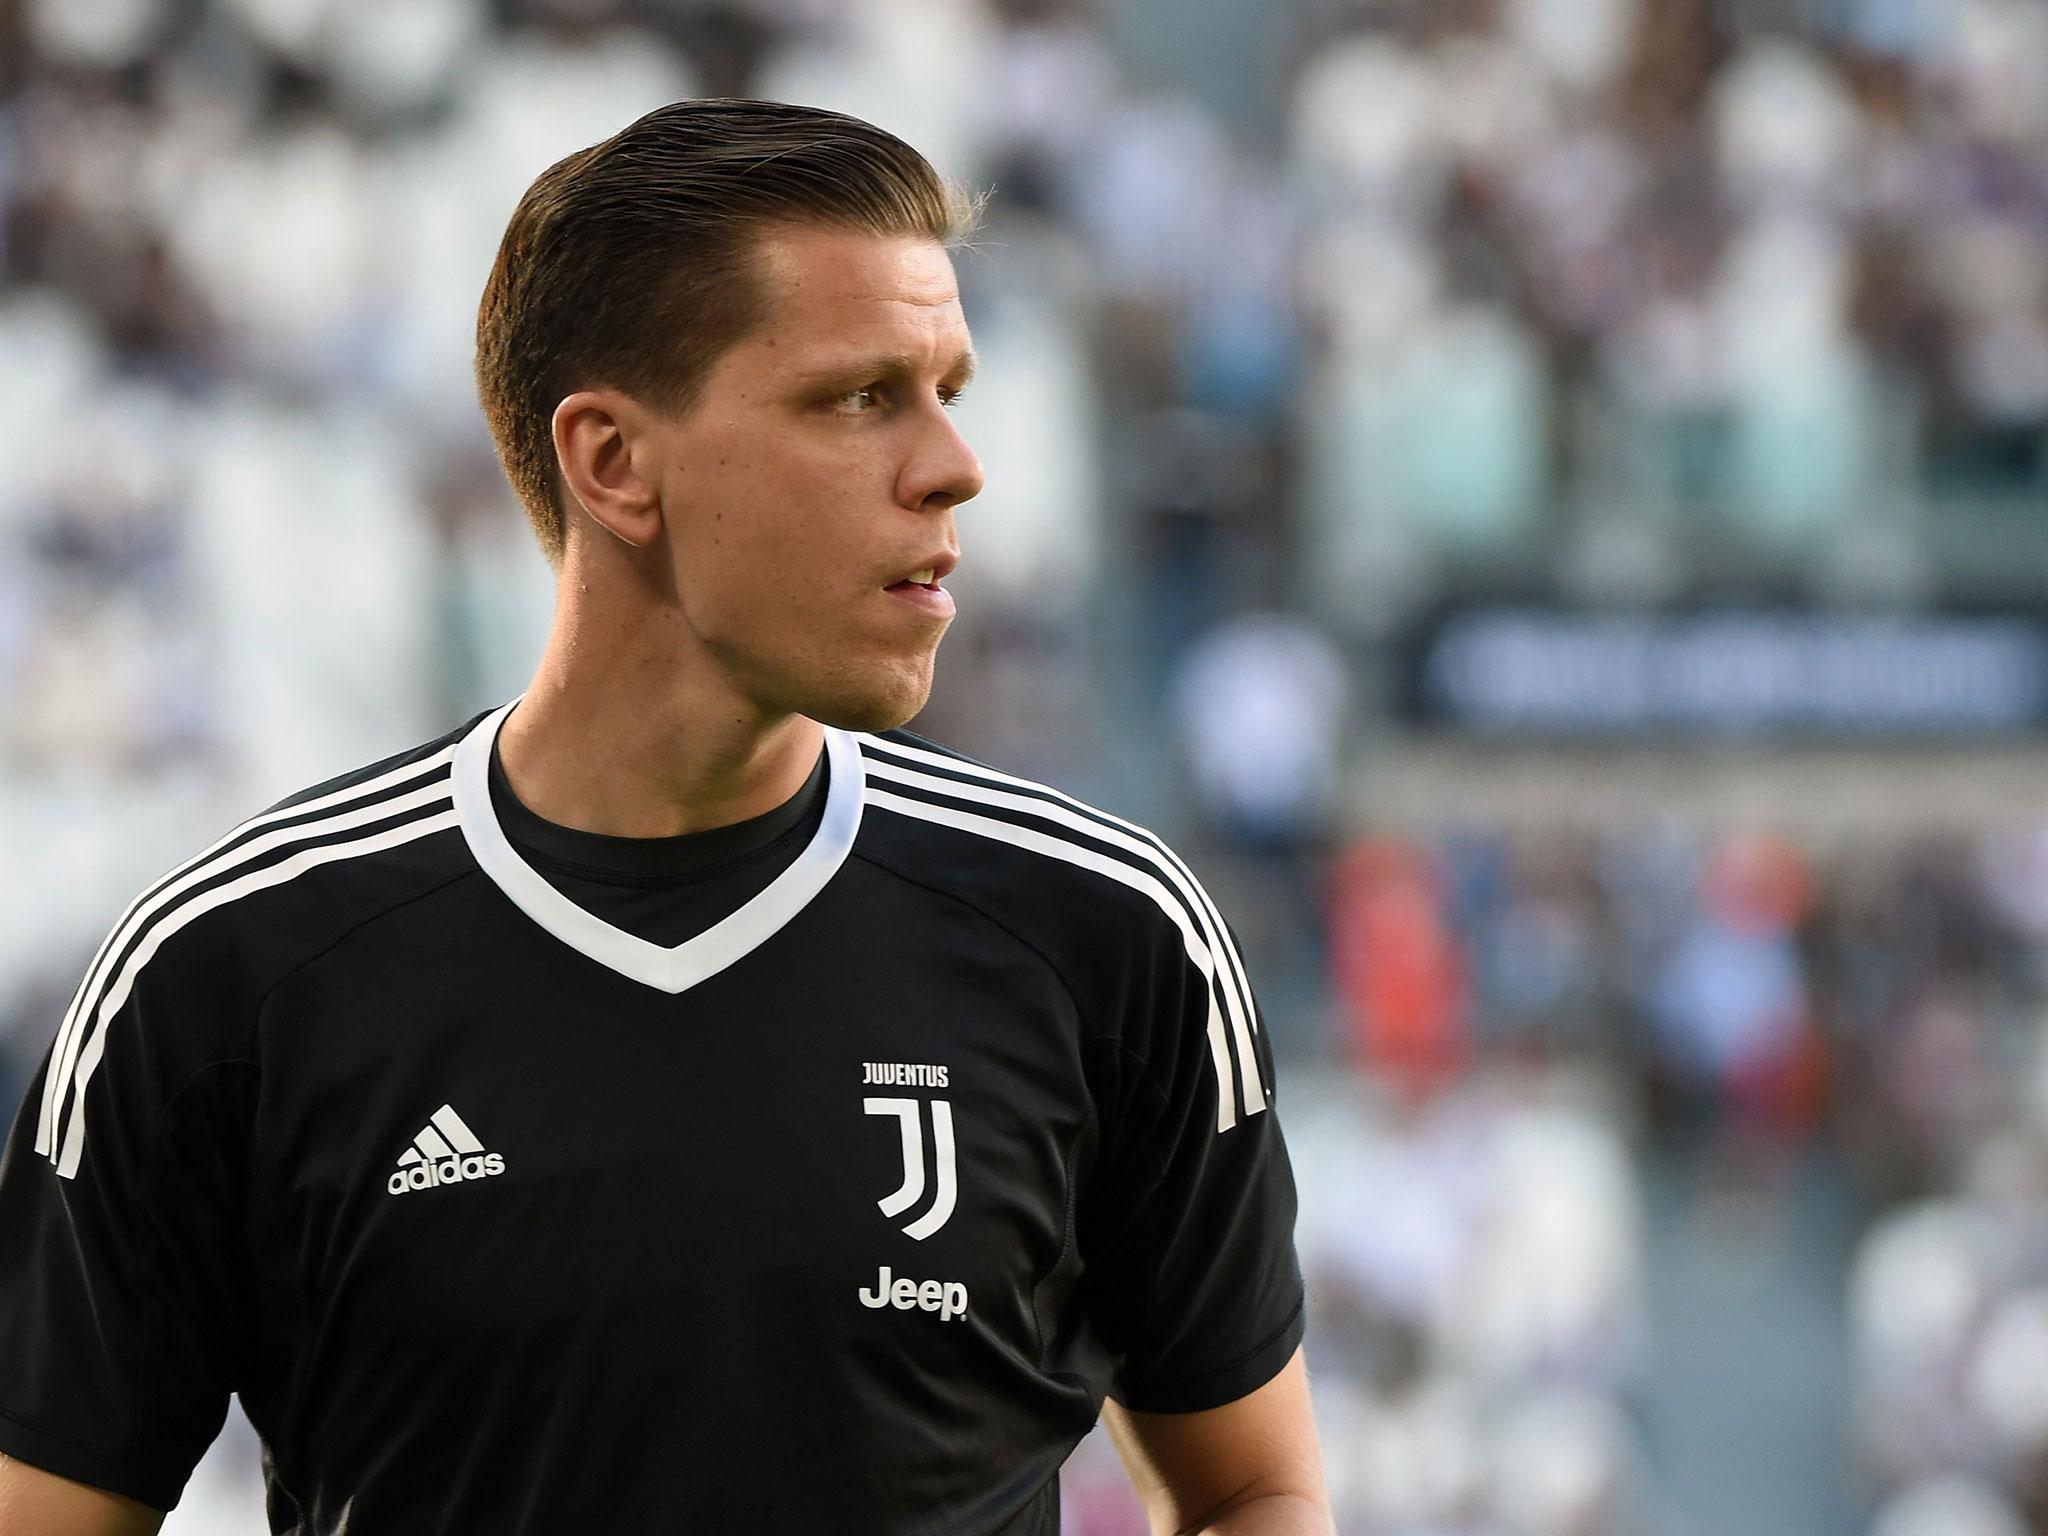 Wojciech Szczesny left Arsenal for a new adventure but already knows he made the right decision